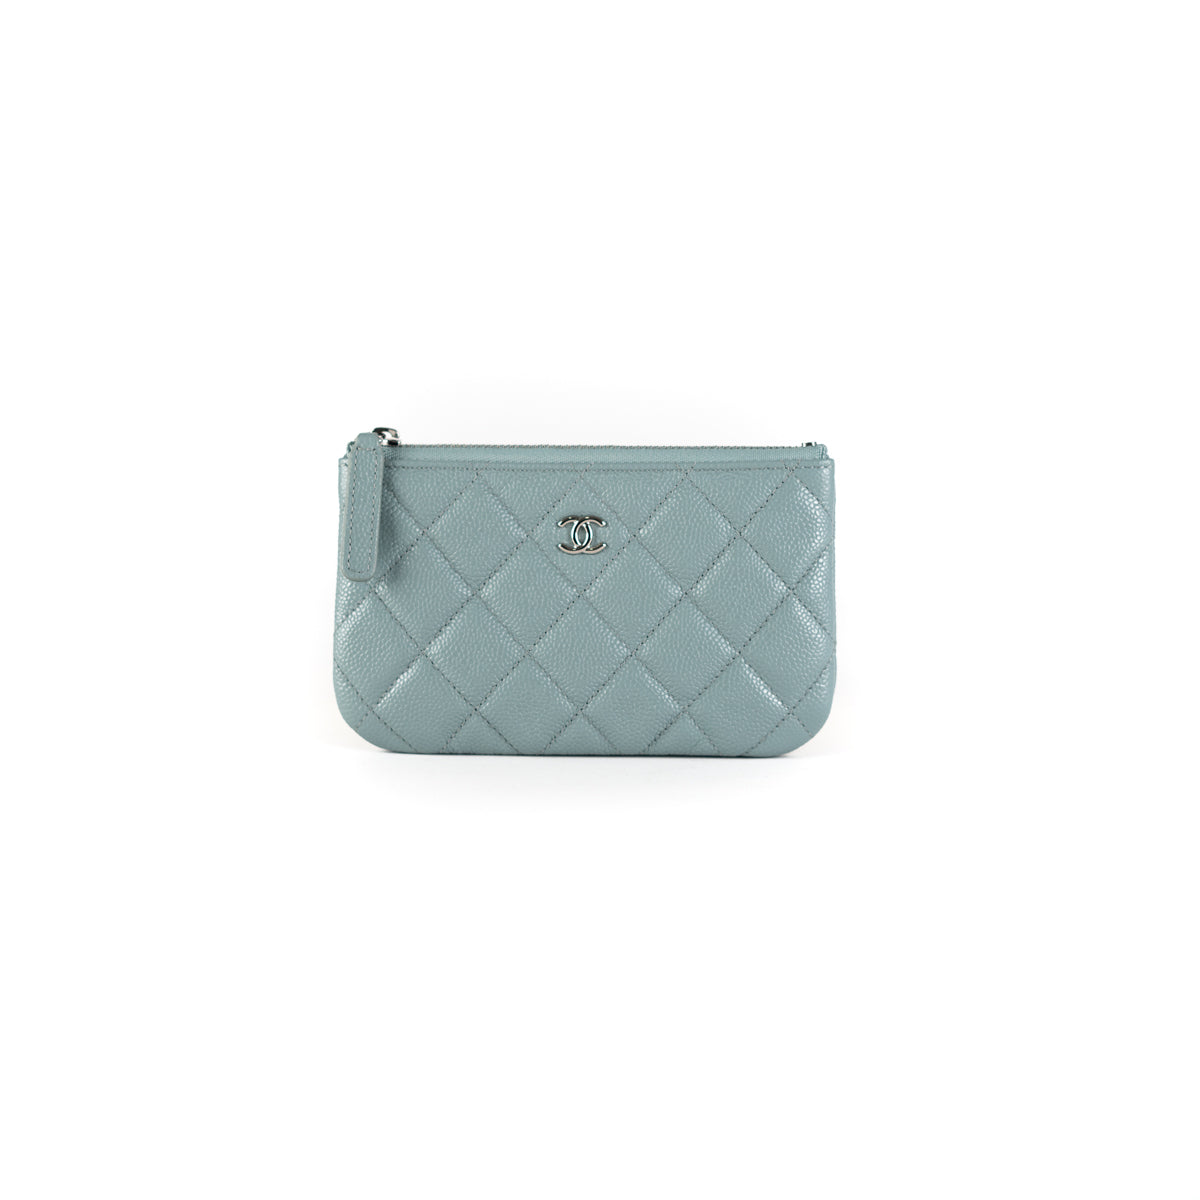 Shop CHANEL Classic Mini Pouch (A82365 Y01480 C3906) by .loulou.